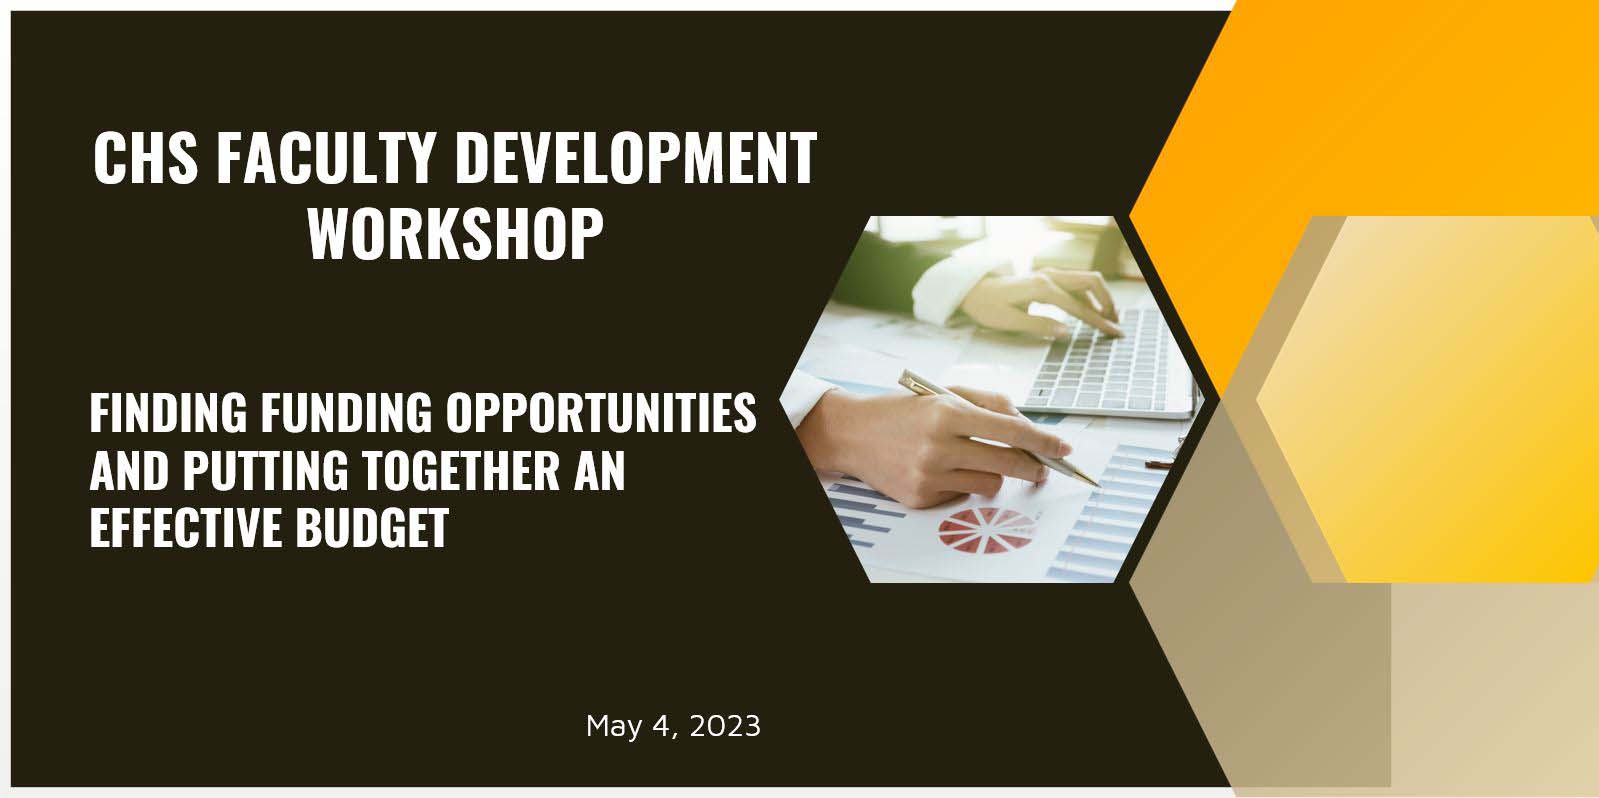 Advertisement for a faculty development workshop.